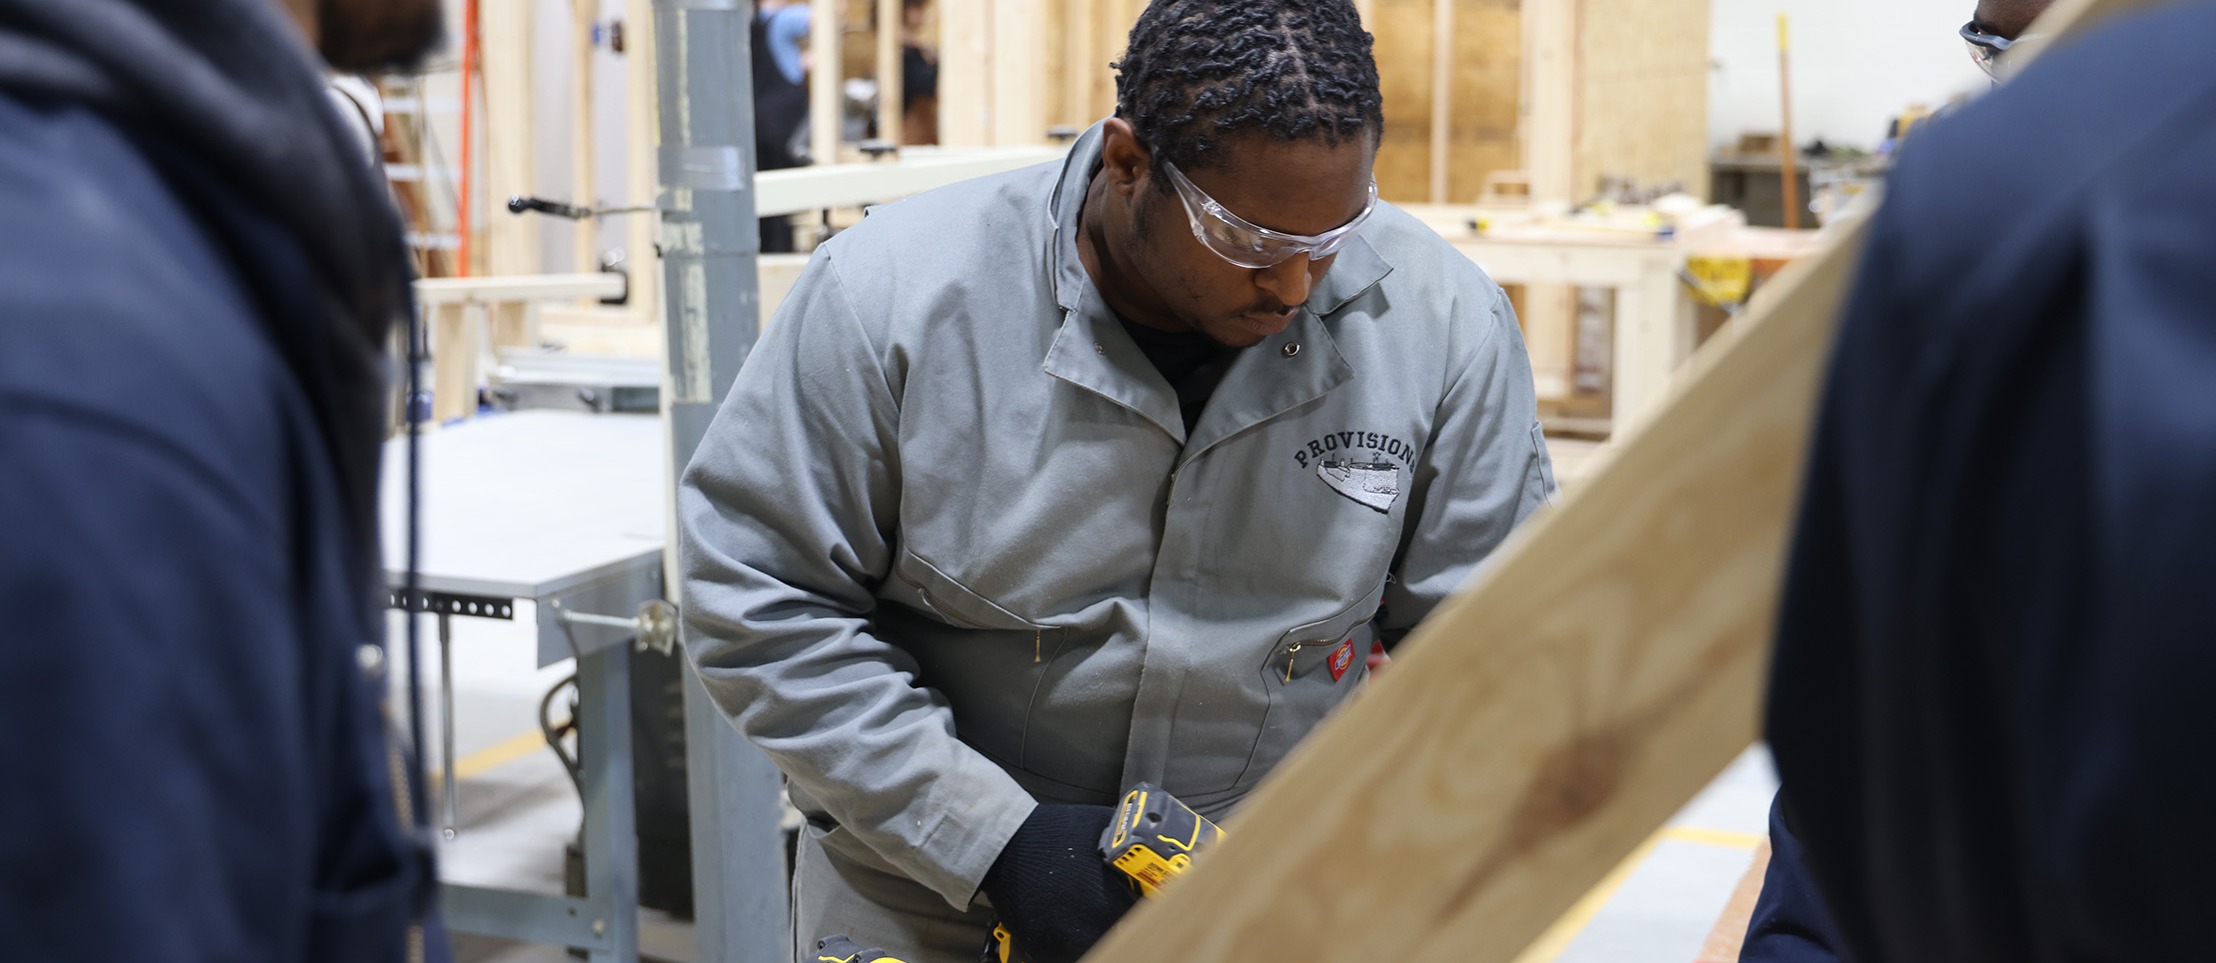 Building Trades Student Working